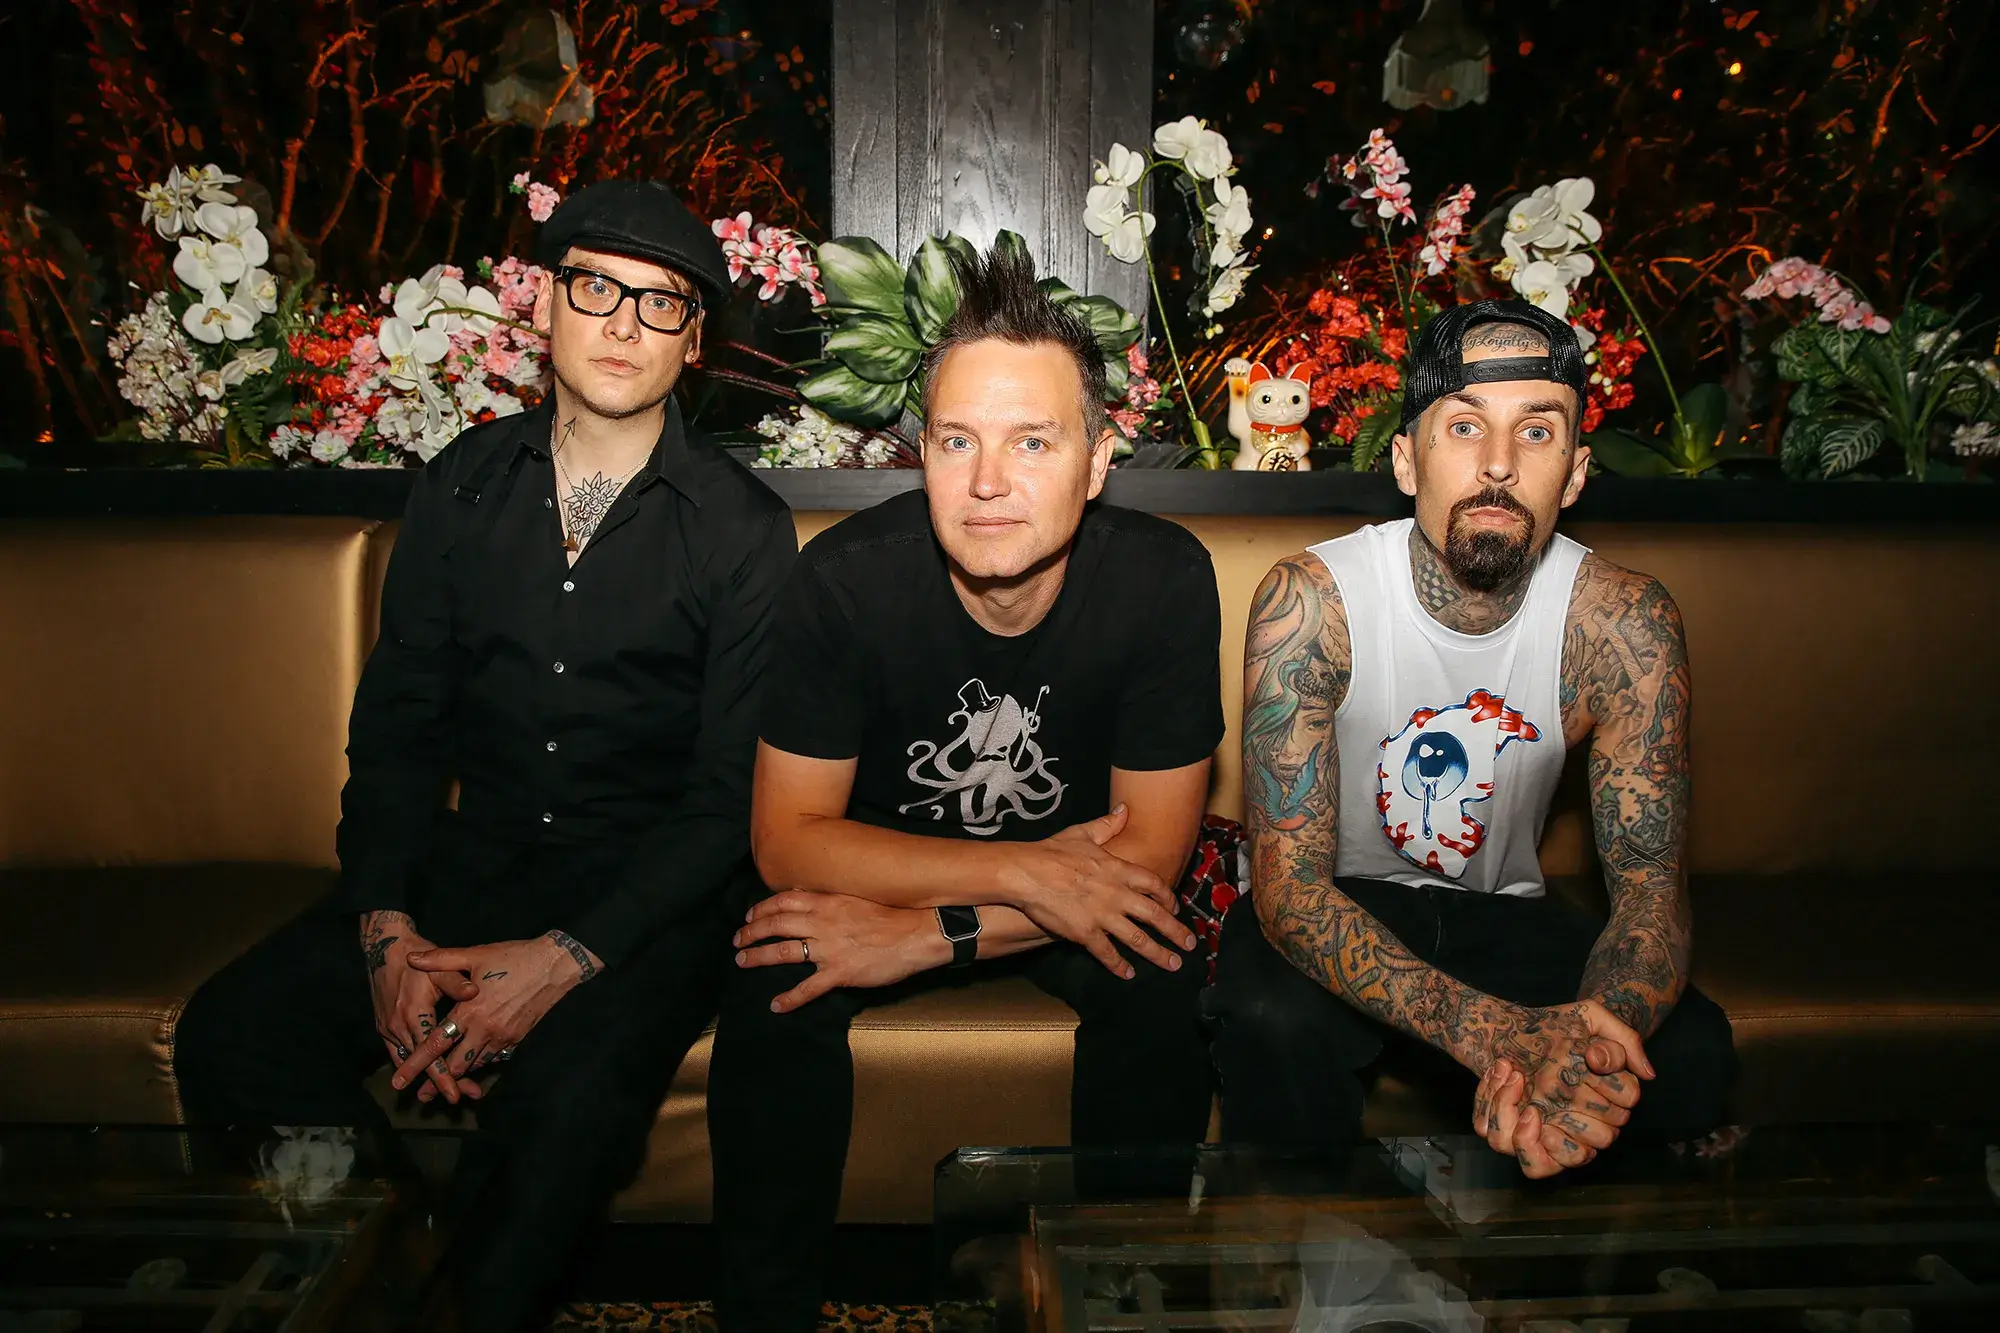 Blink-182 Reunites after 8 years added to Coachella 2023 lineup 